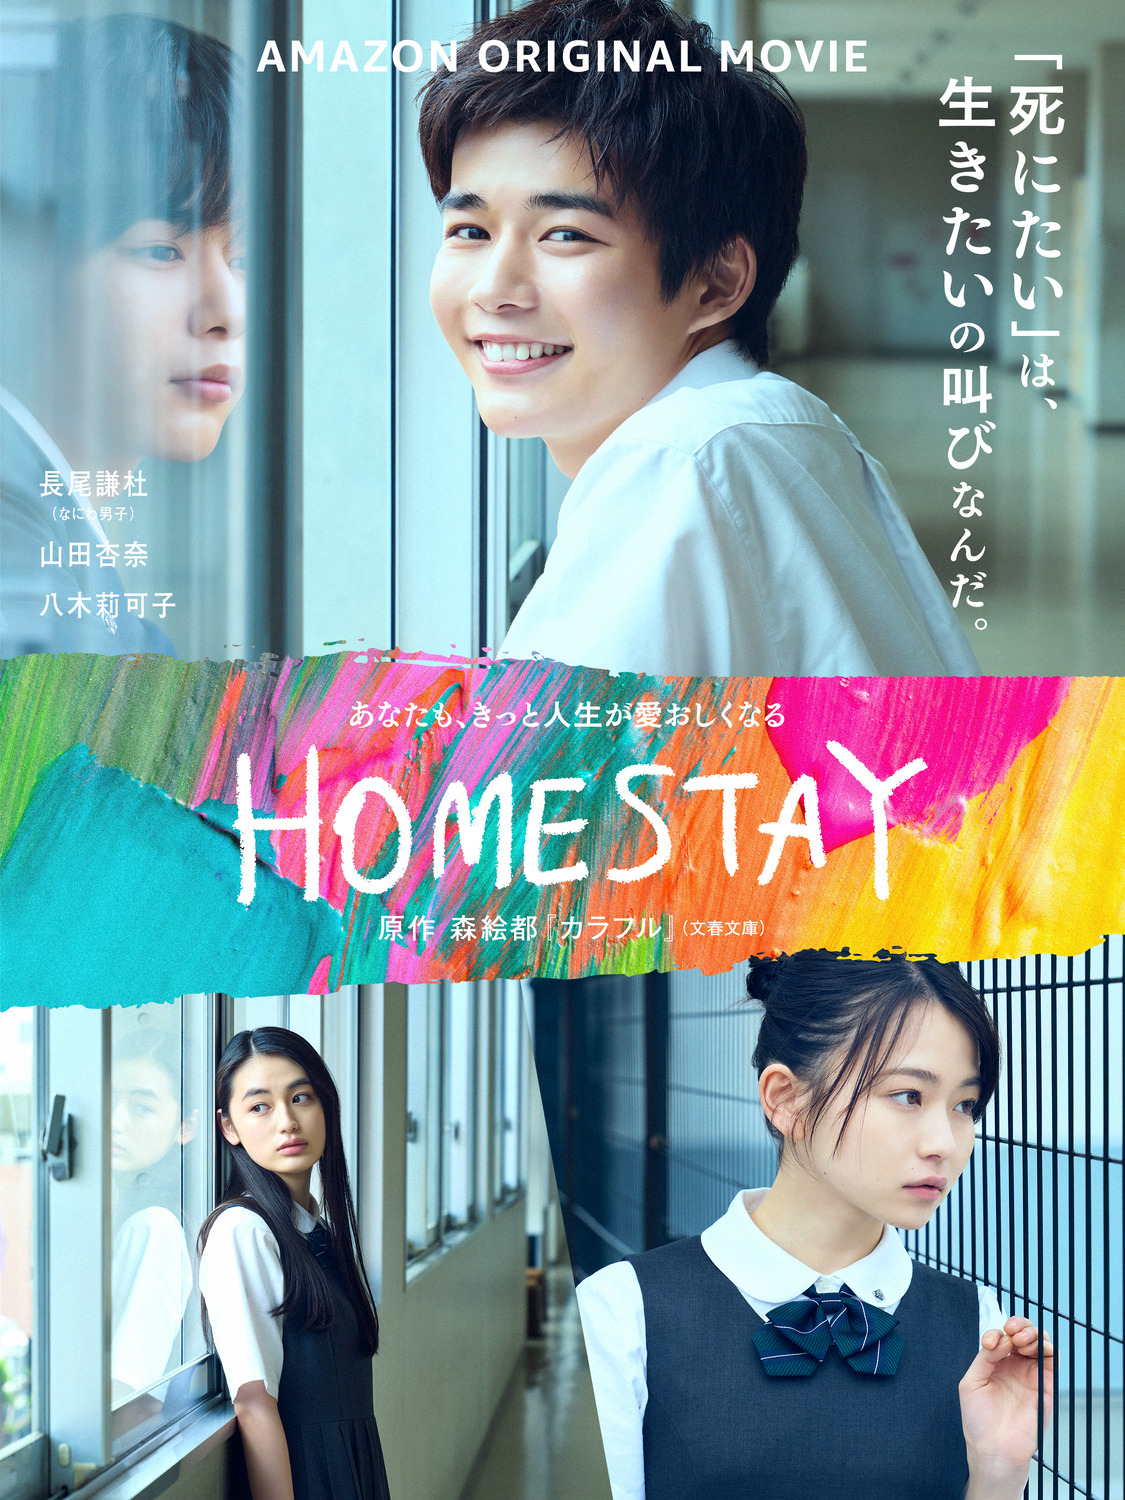 Extra Large Movie Poster Image for Homestay 